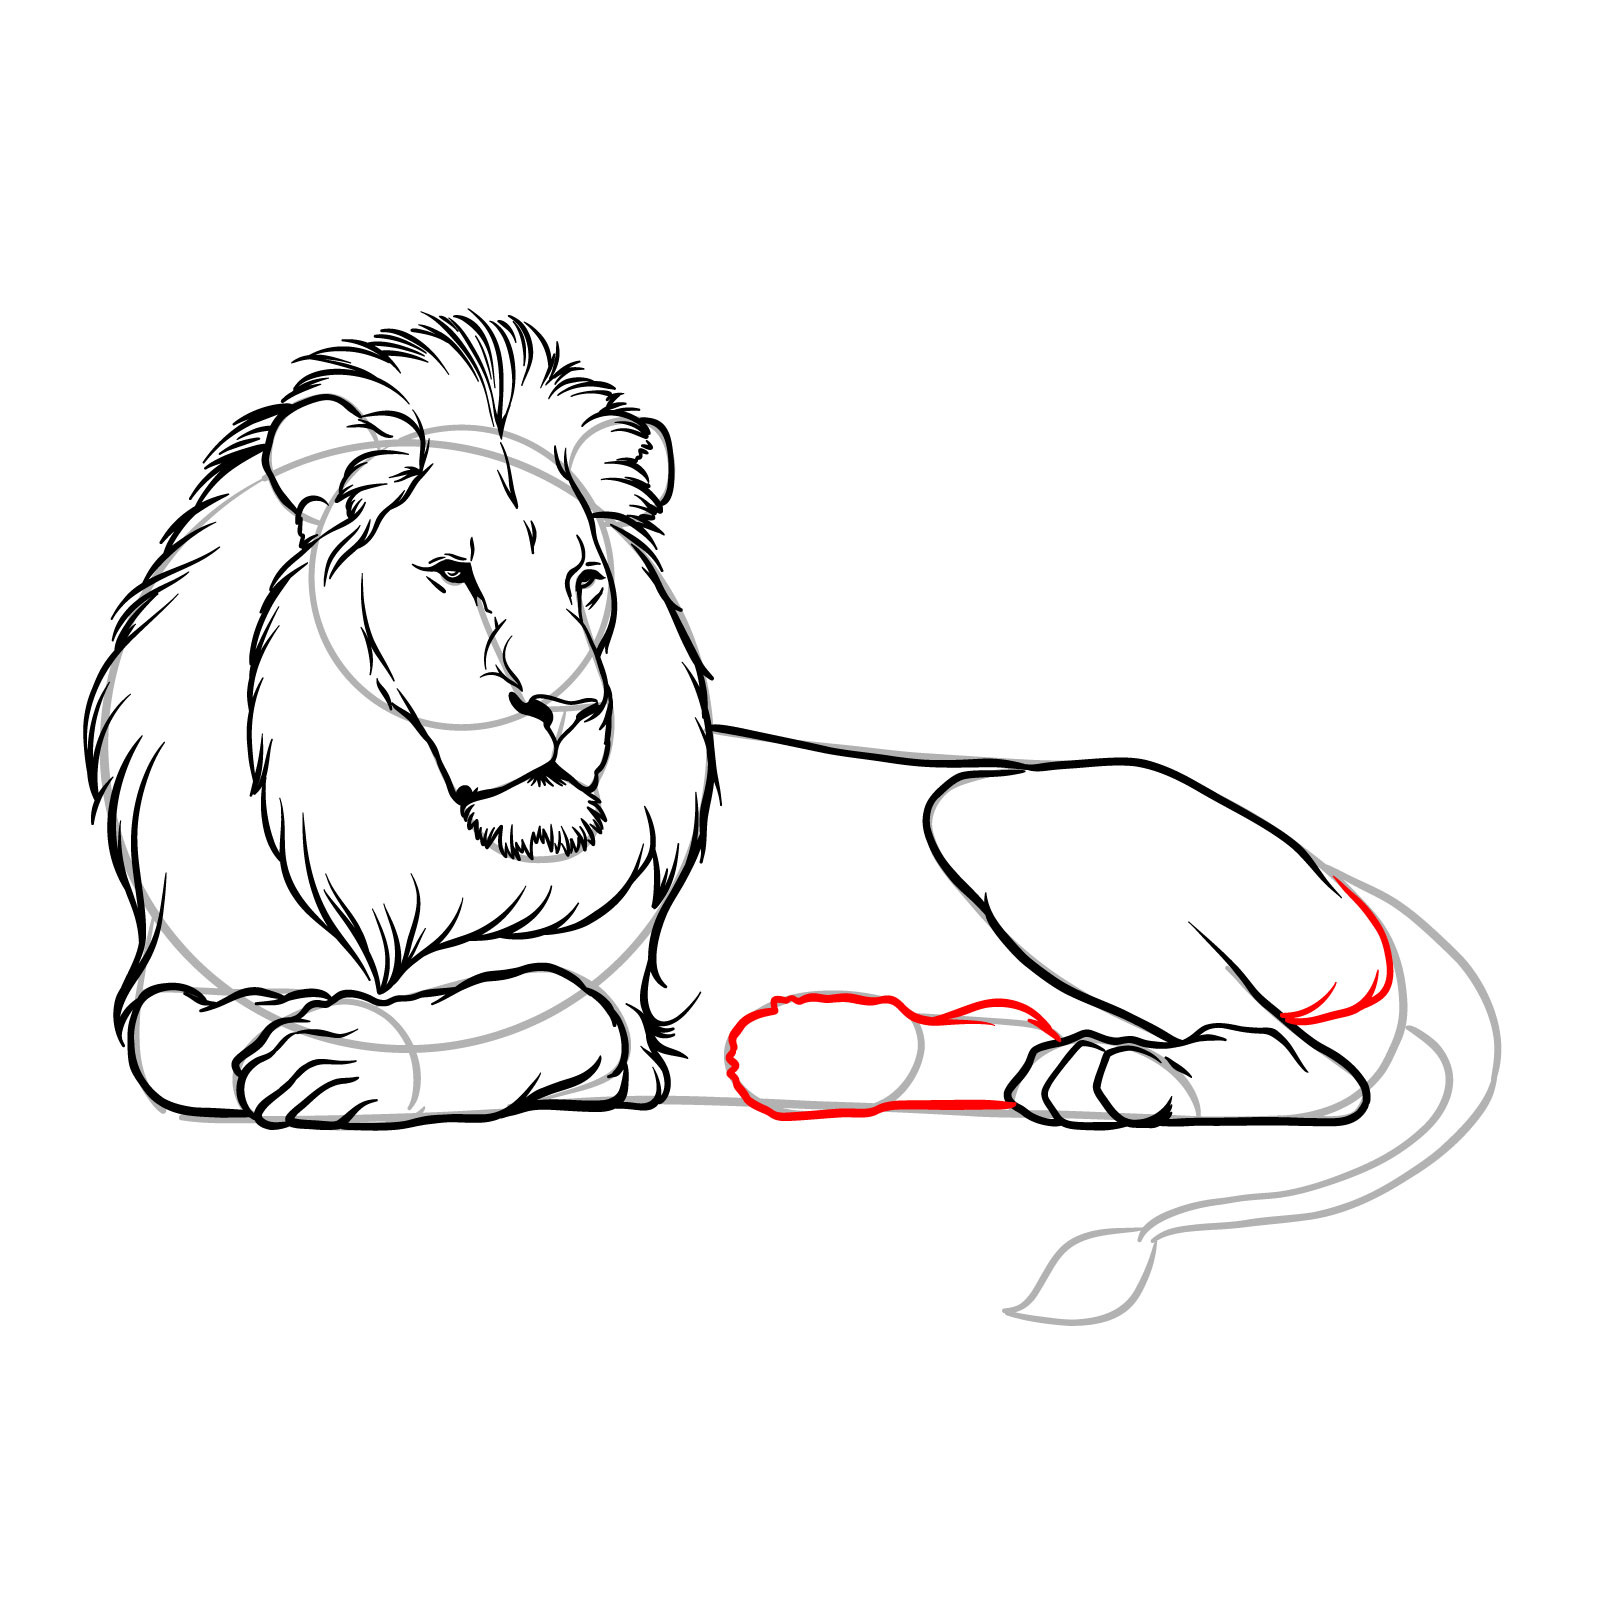 How to draw a lying lion in side view - Step 13: Outlining the second rear leg